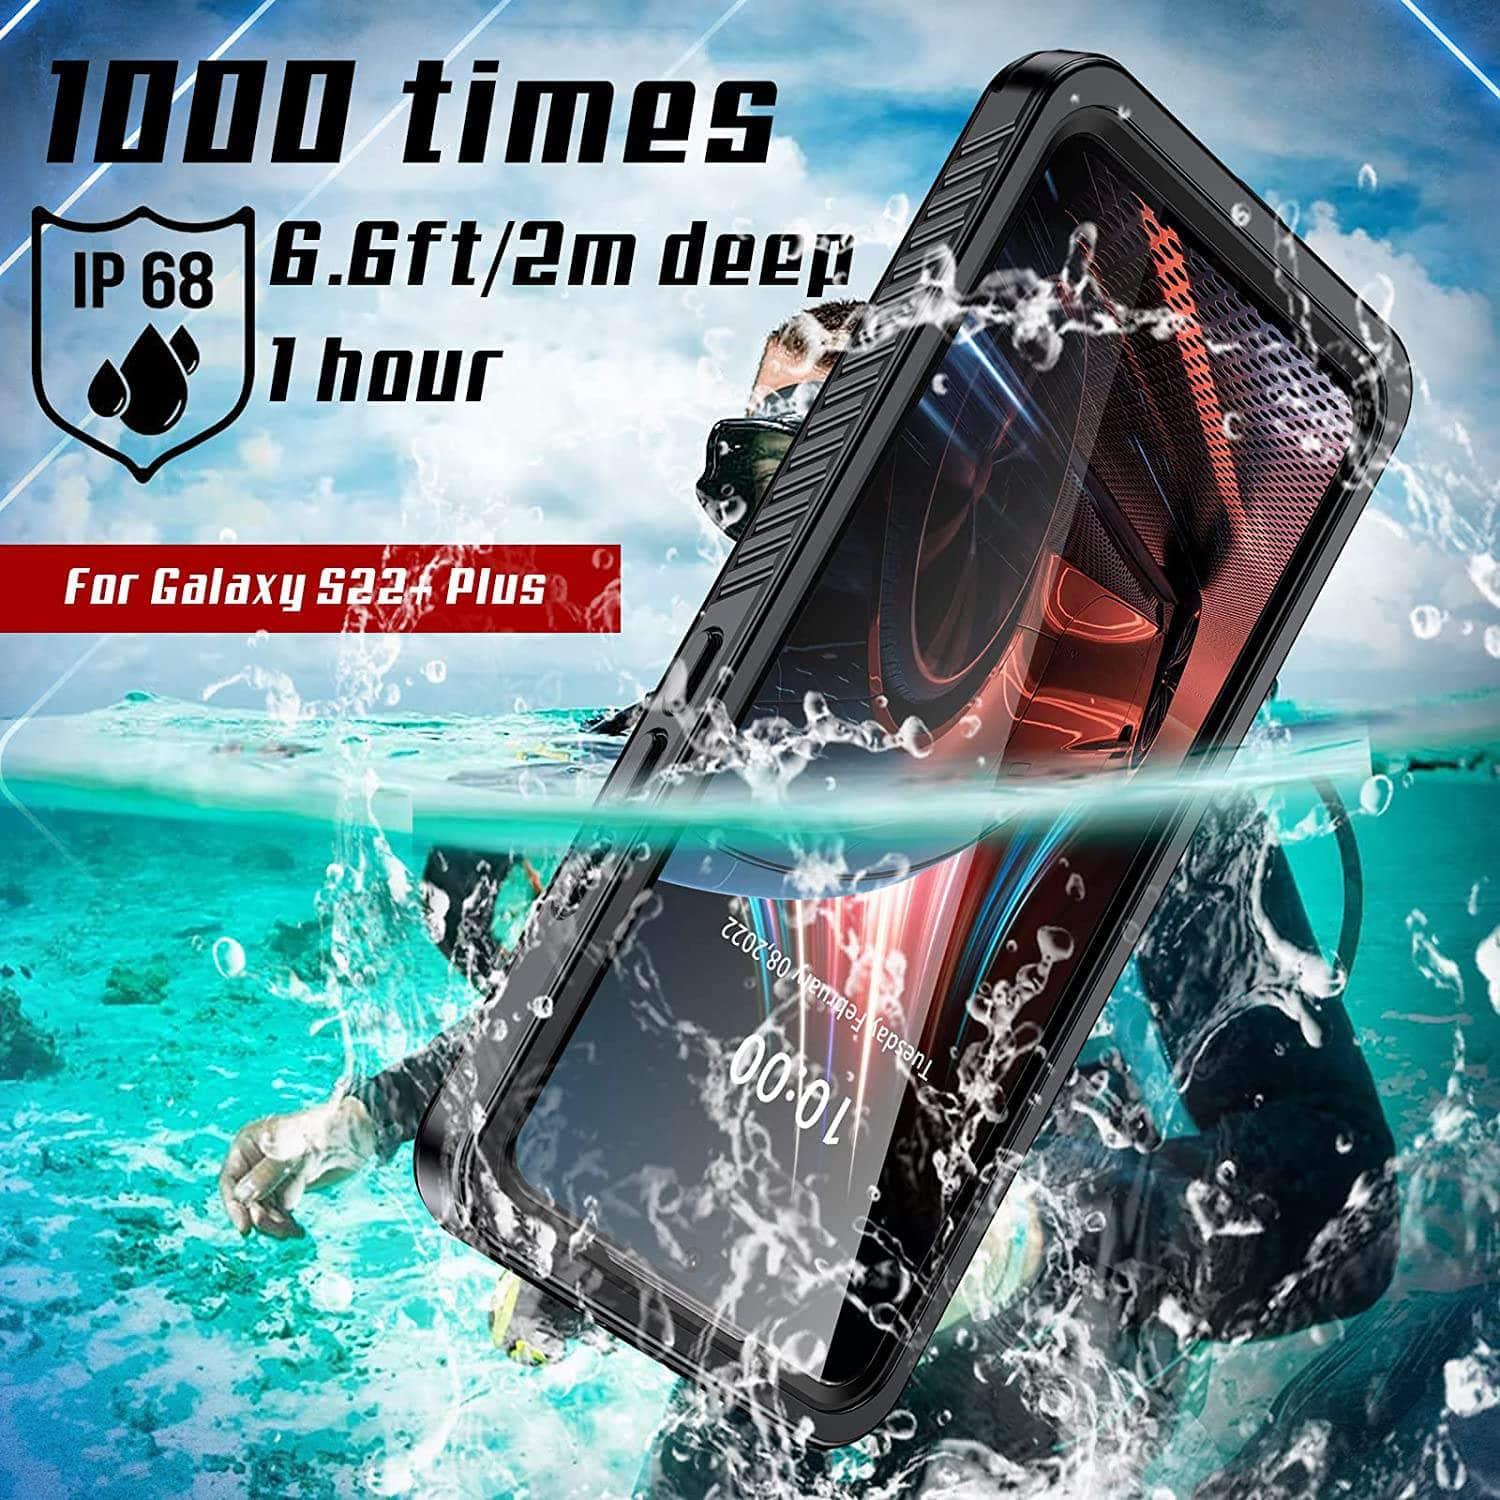 CaseBuddy Australia Casebuddy Galaxy S22 IP68 Waterproof Full Protective Built-in Screen Protector Case